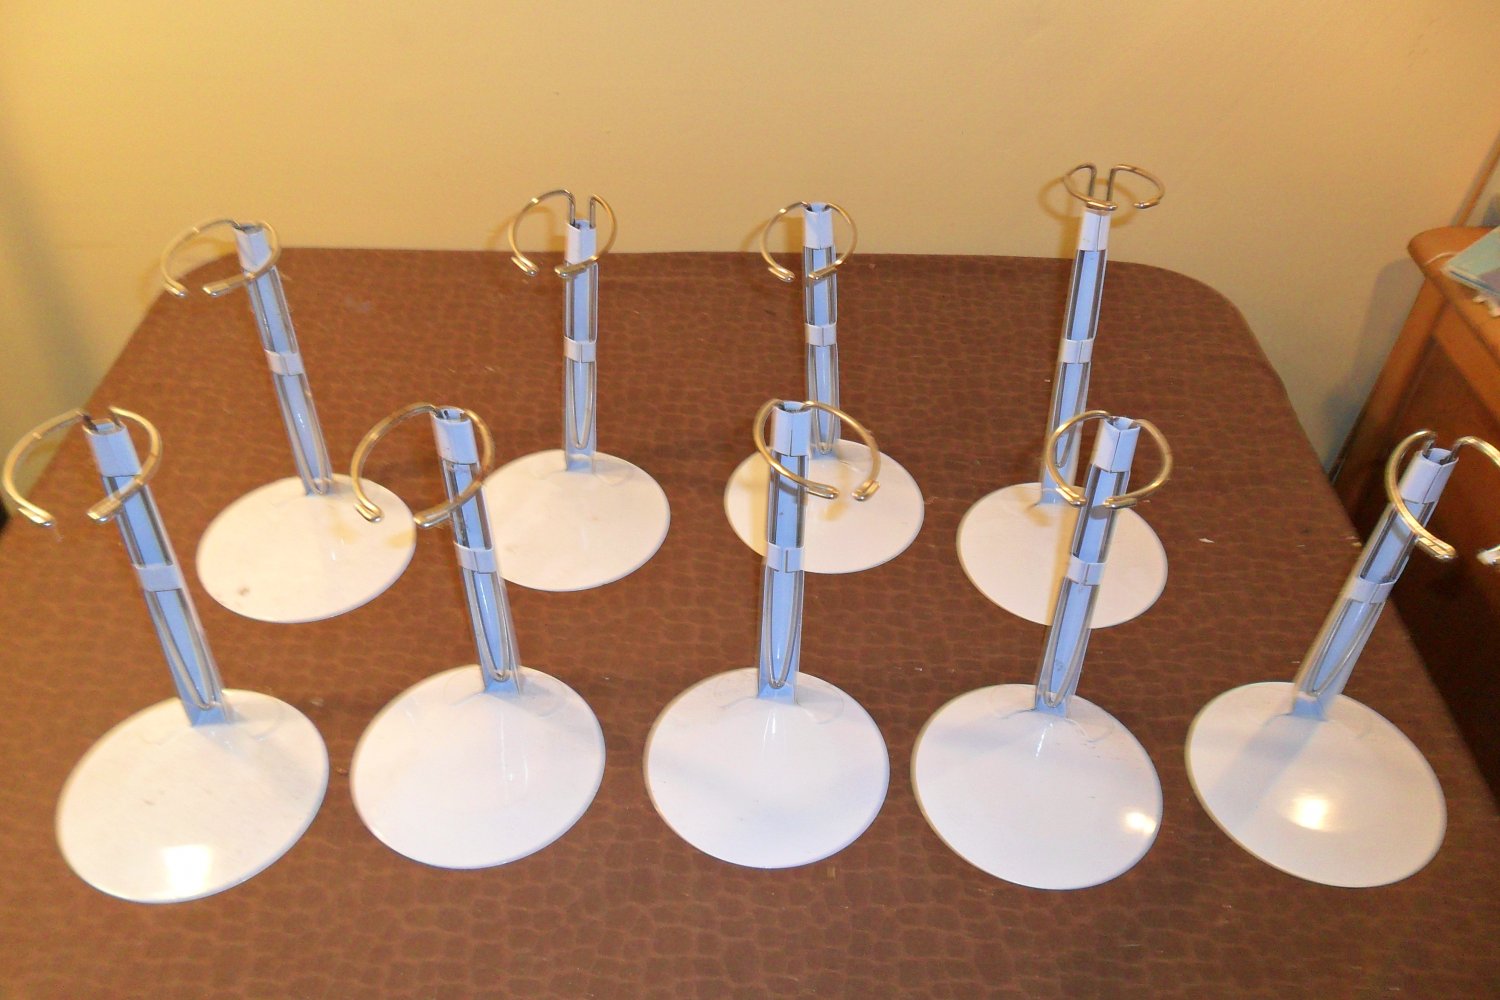 9 High Quality Doll Stands for Dolls 20-26 14-18 Inches Tall all in like new condition.